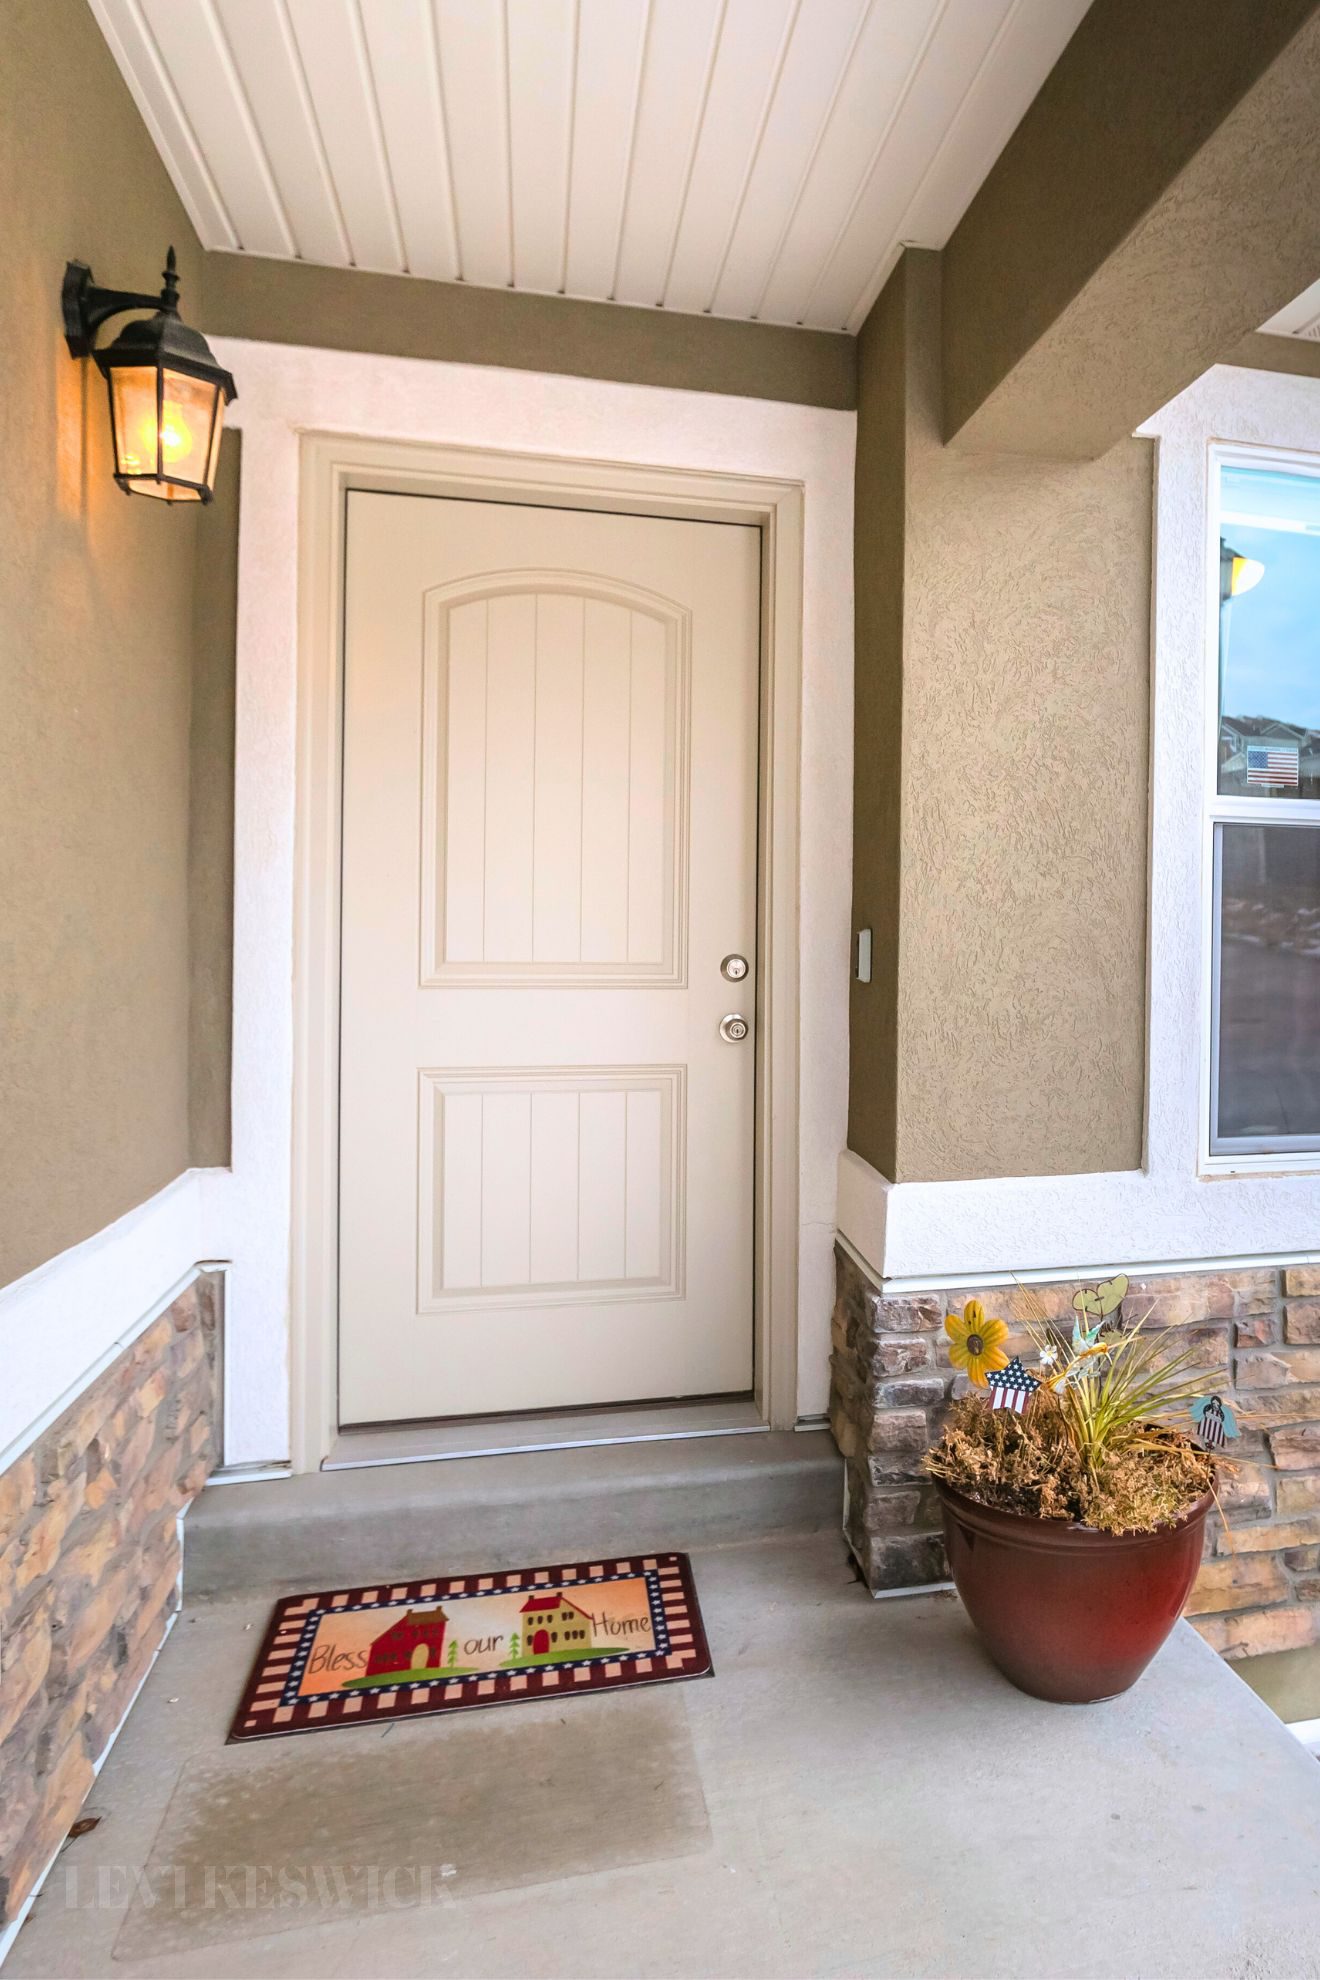 How To Personalize Your Home’s Front Entrance